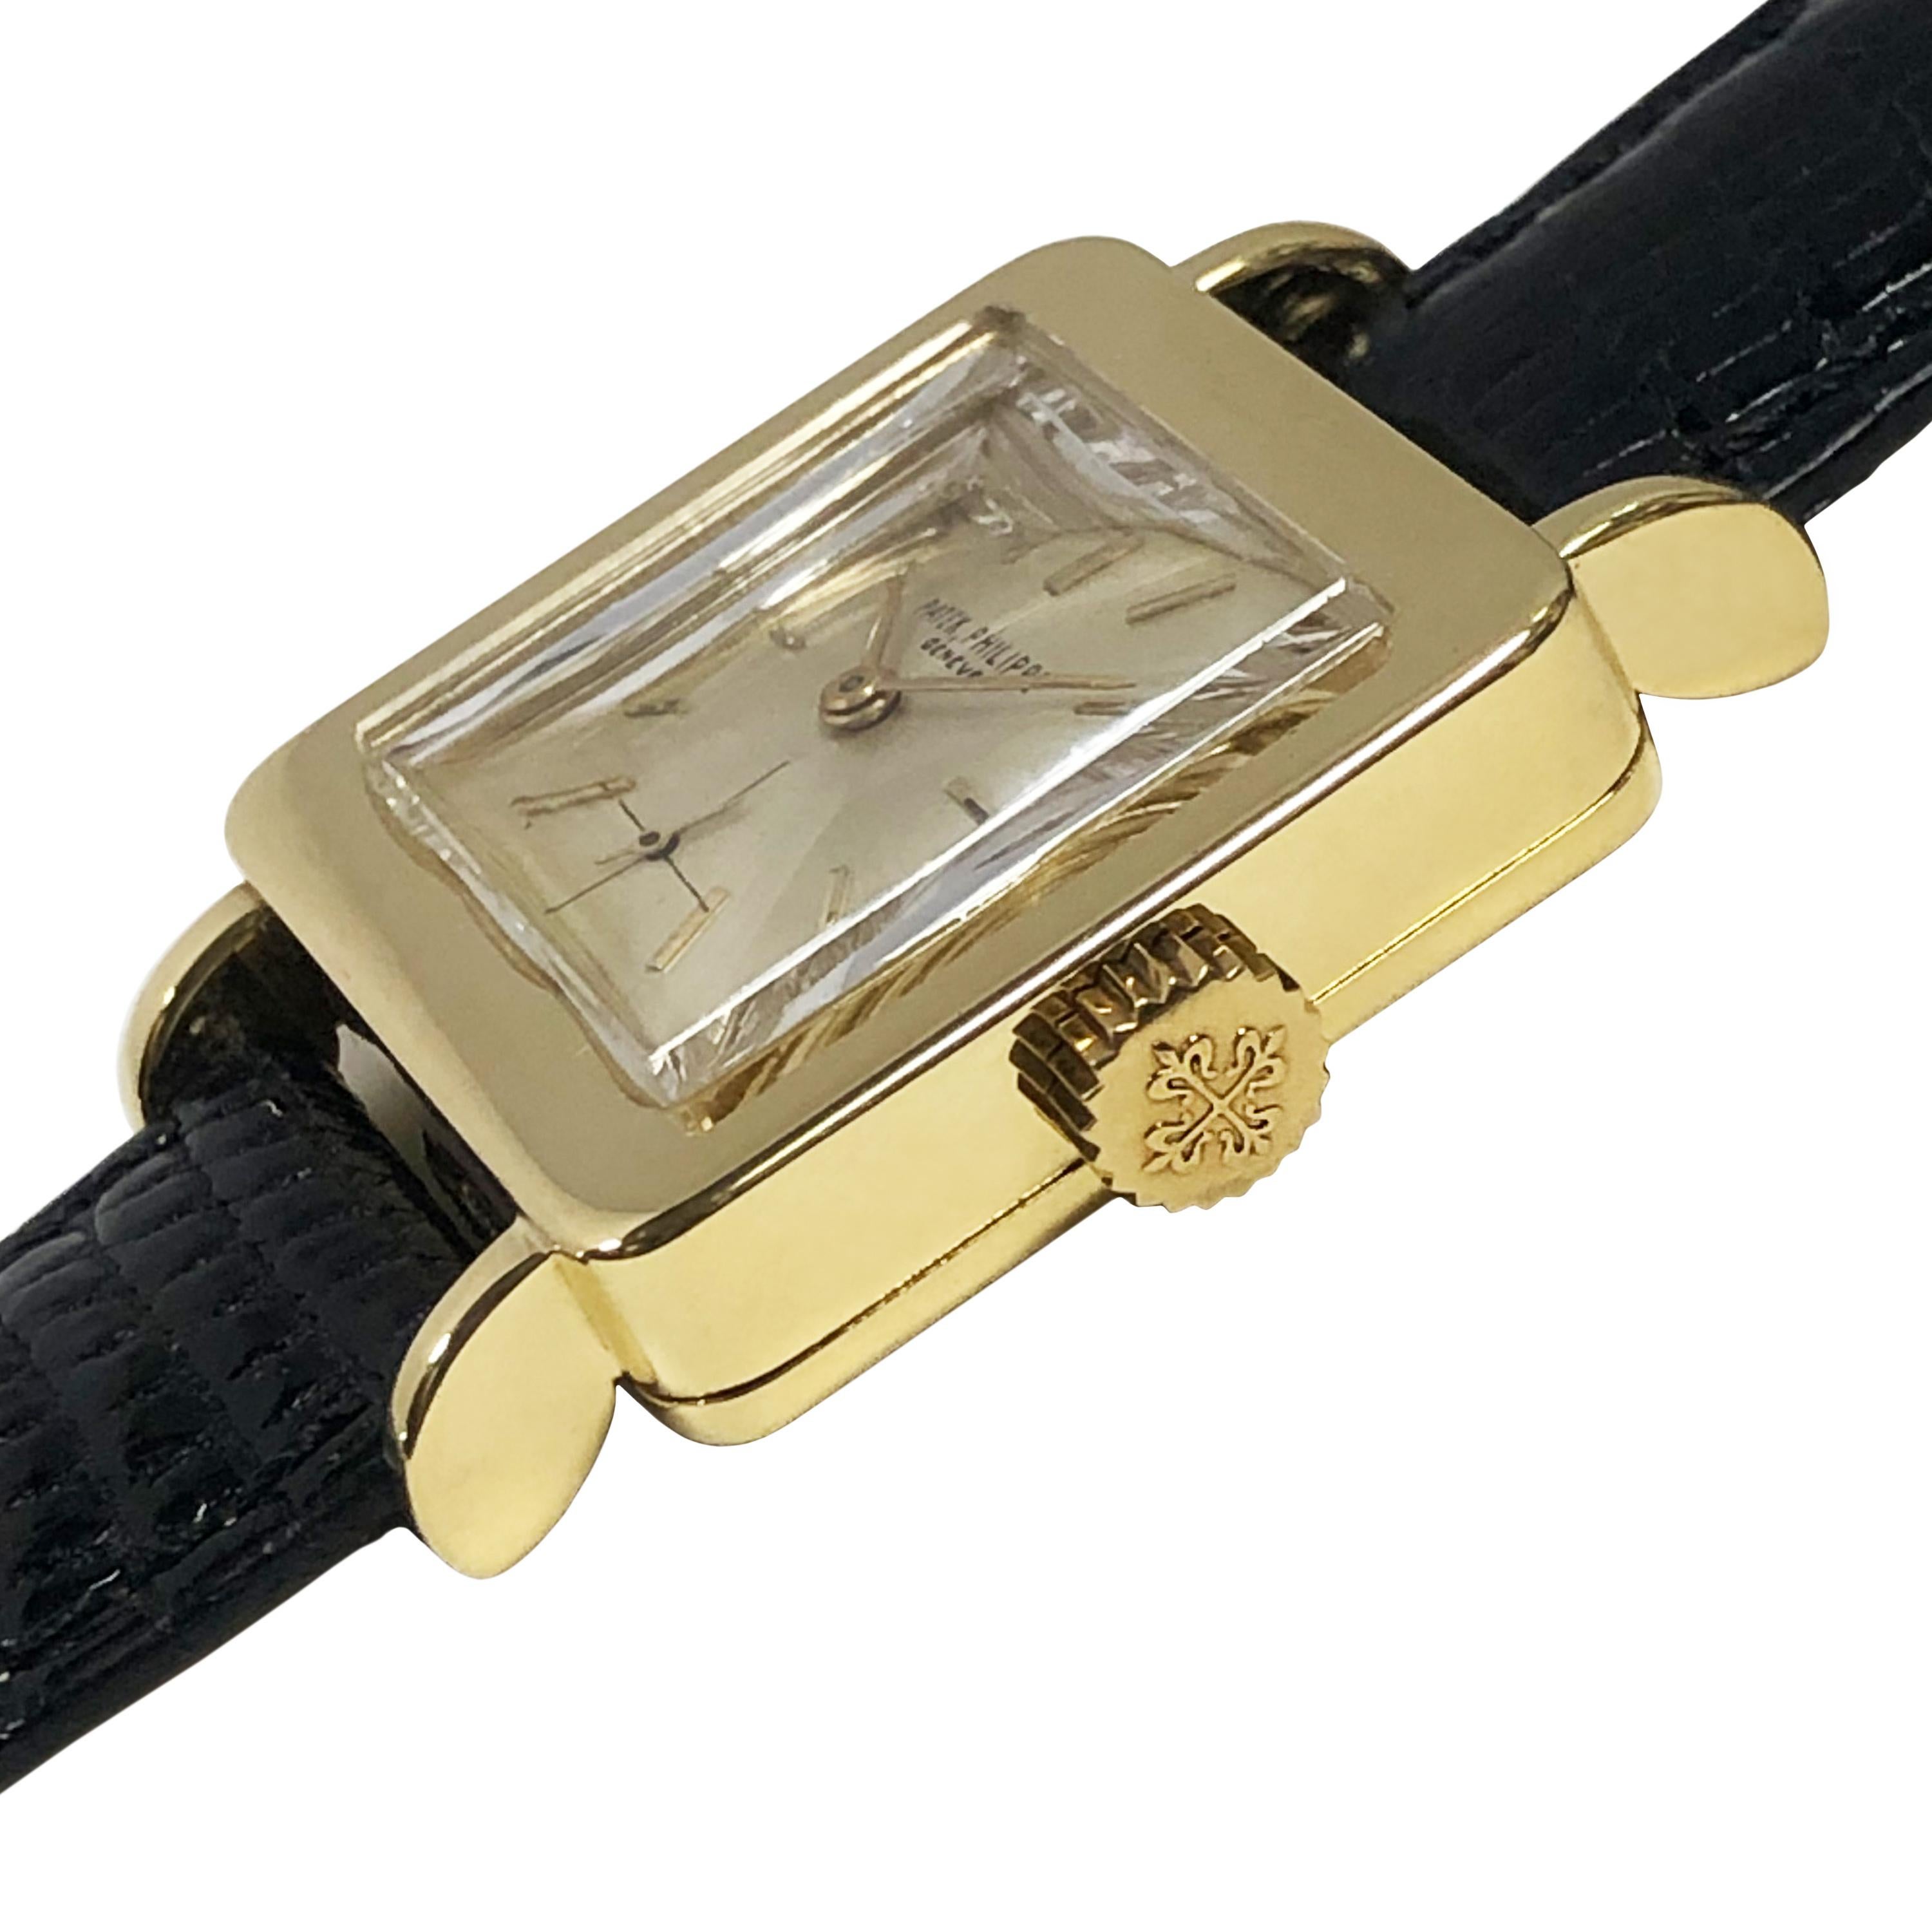 Circa 1950 Patek Philippe Wrist Watch, 36 M.M. from Lug end to end  X  26 M.M. 18K Yellow Gold 2 Piece case, 18 Jewel Mechanical, manual wind nickle lever movement, Silver Satin dial with Sub seconds chapter and raised Gold markers, original Patek